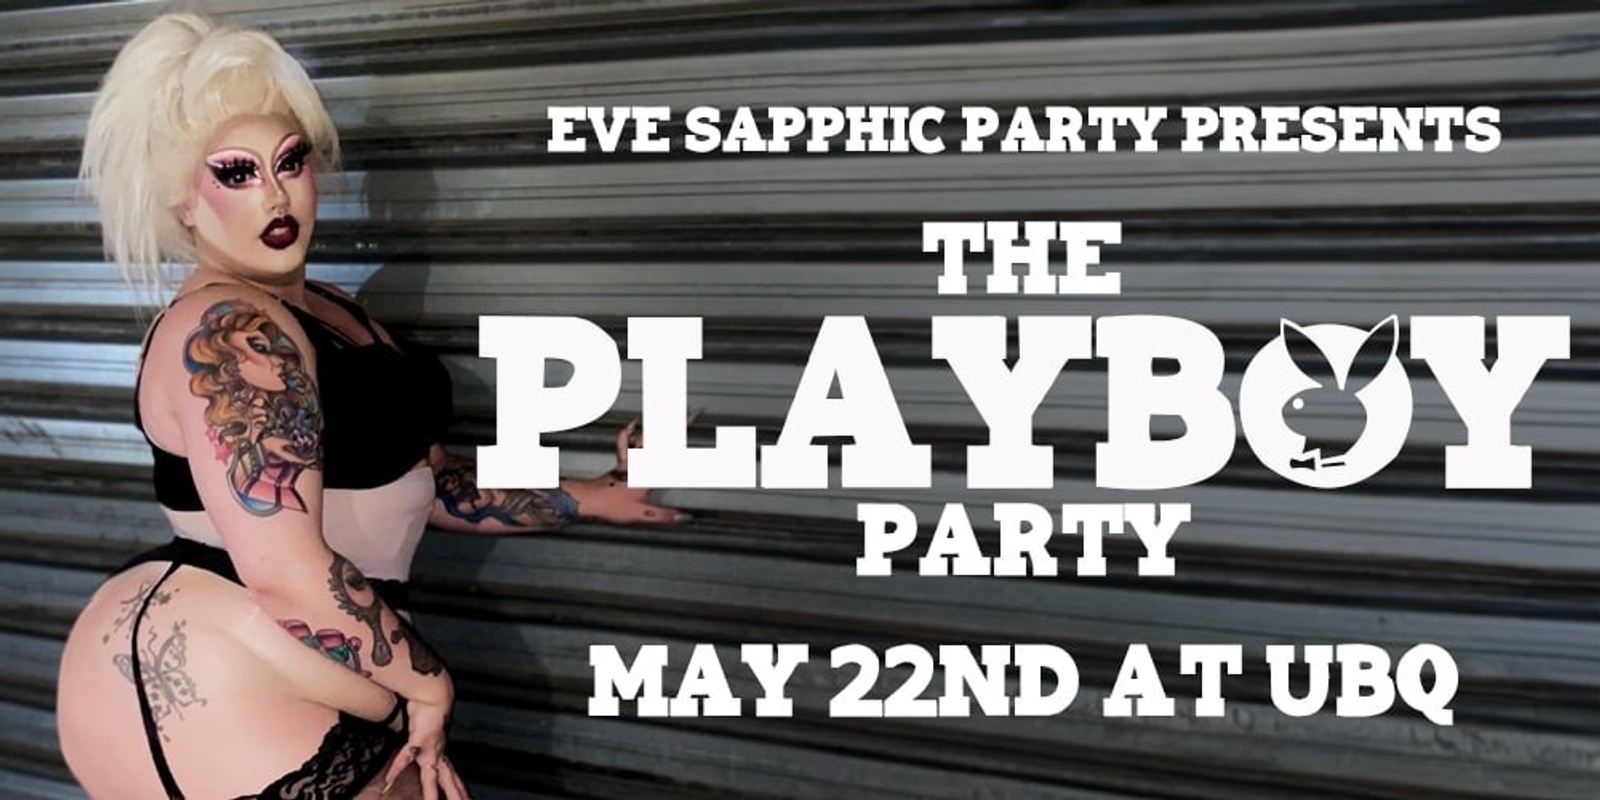 Banner image for Eve Sapphic "Playboy Party"